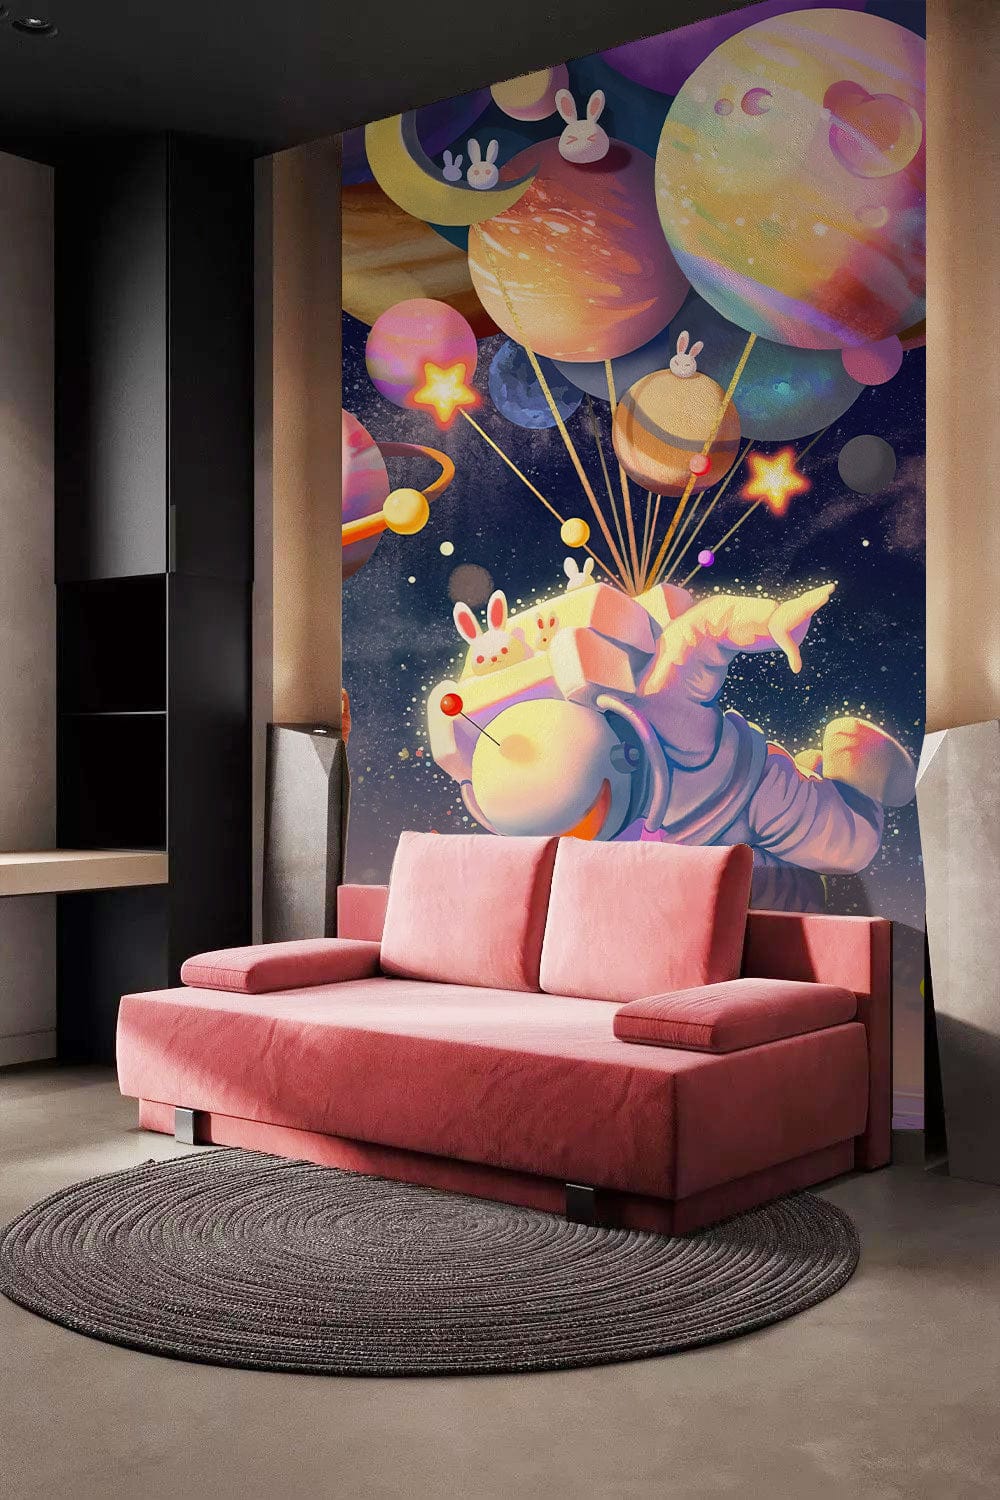 space bunny gifts wall mural hallway decoration idea